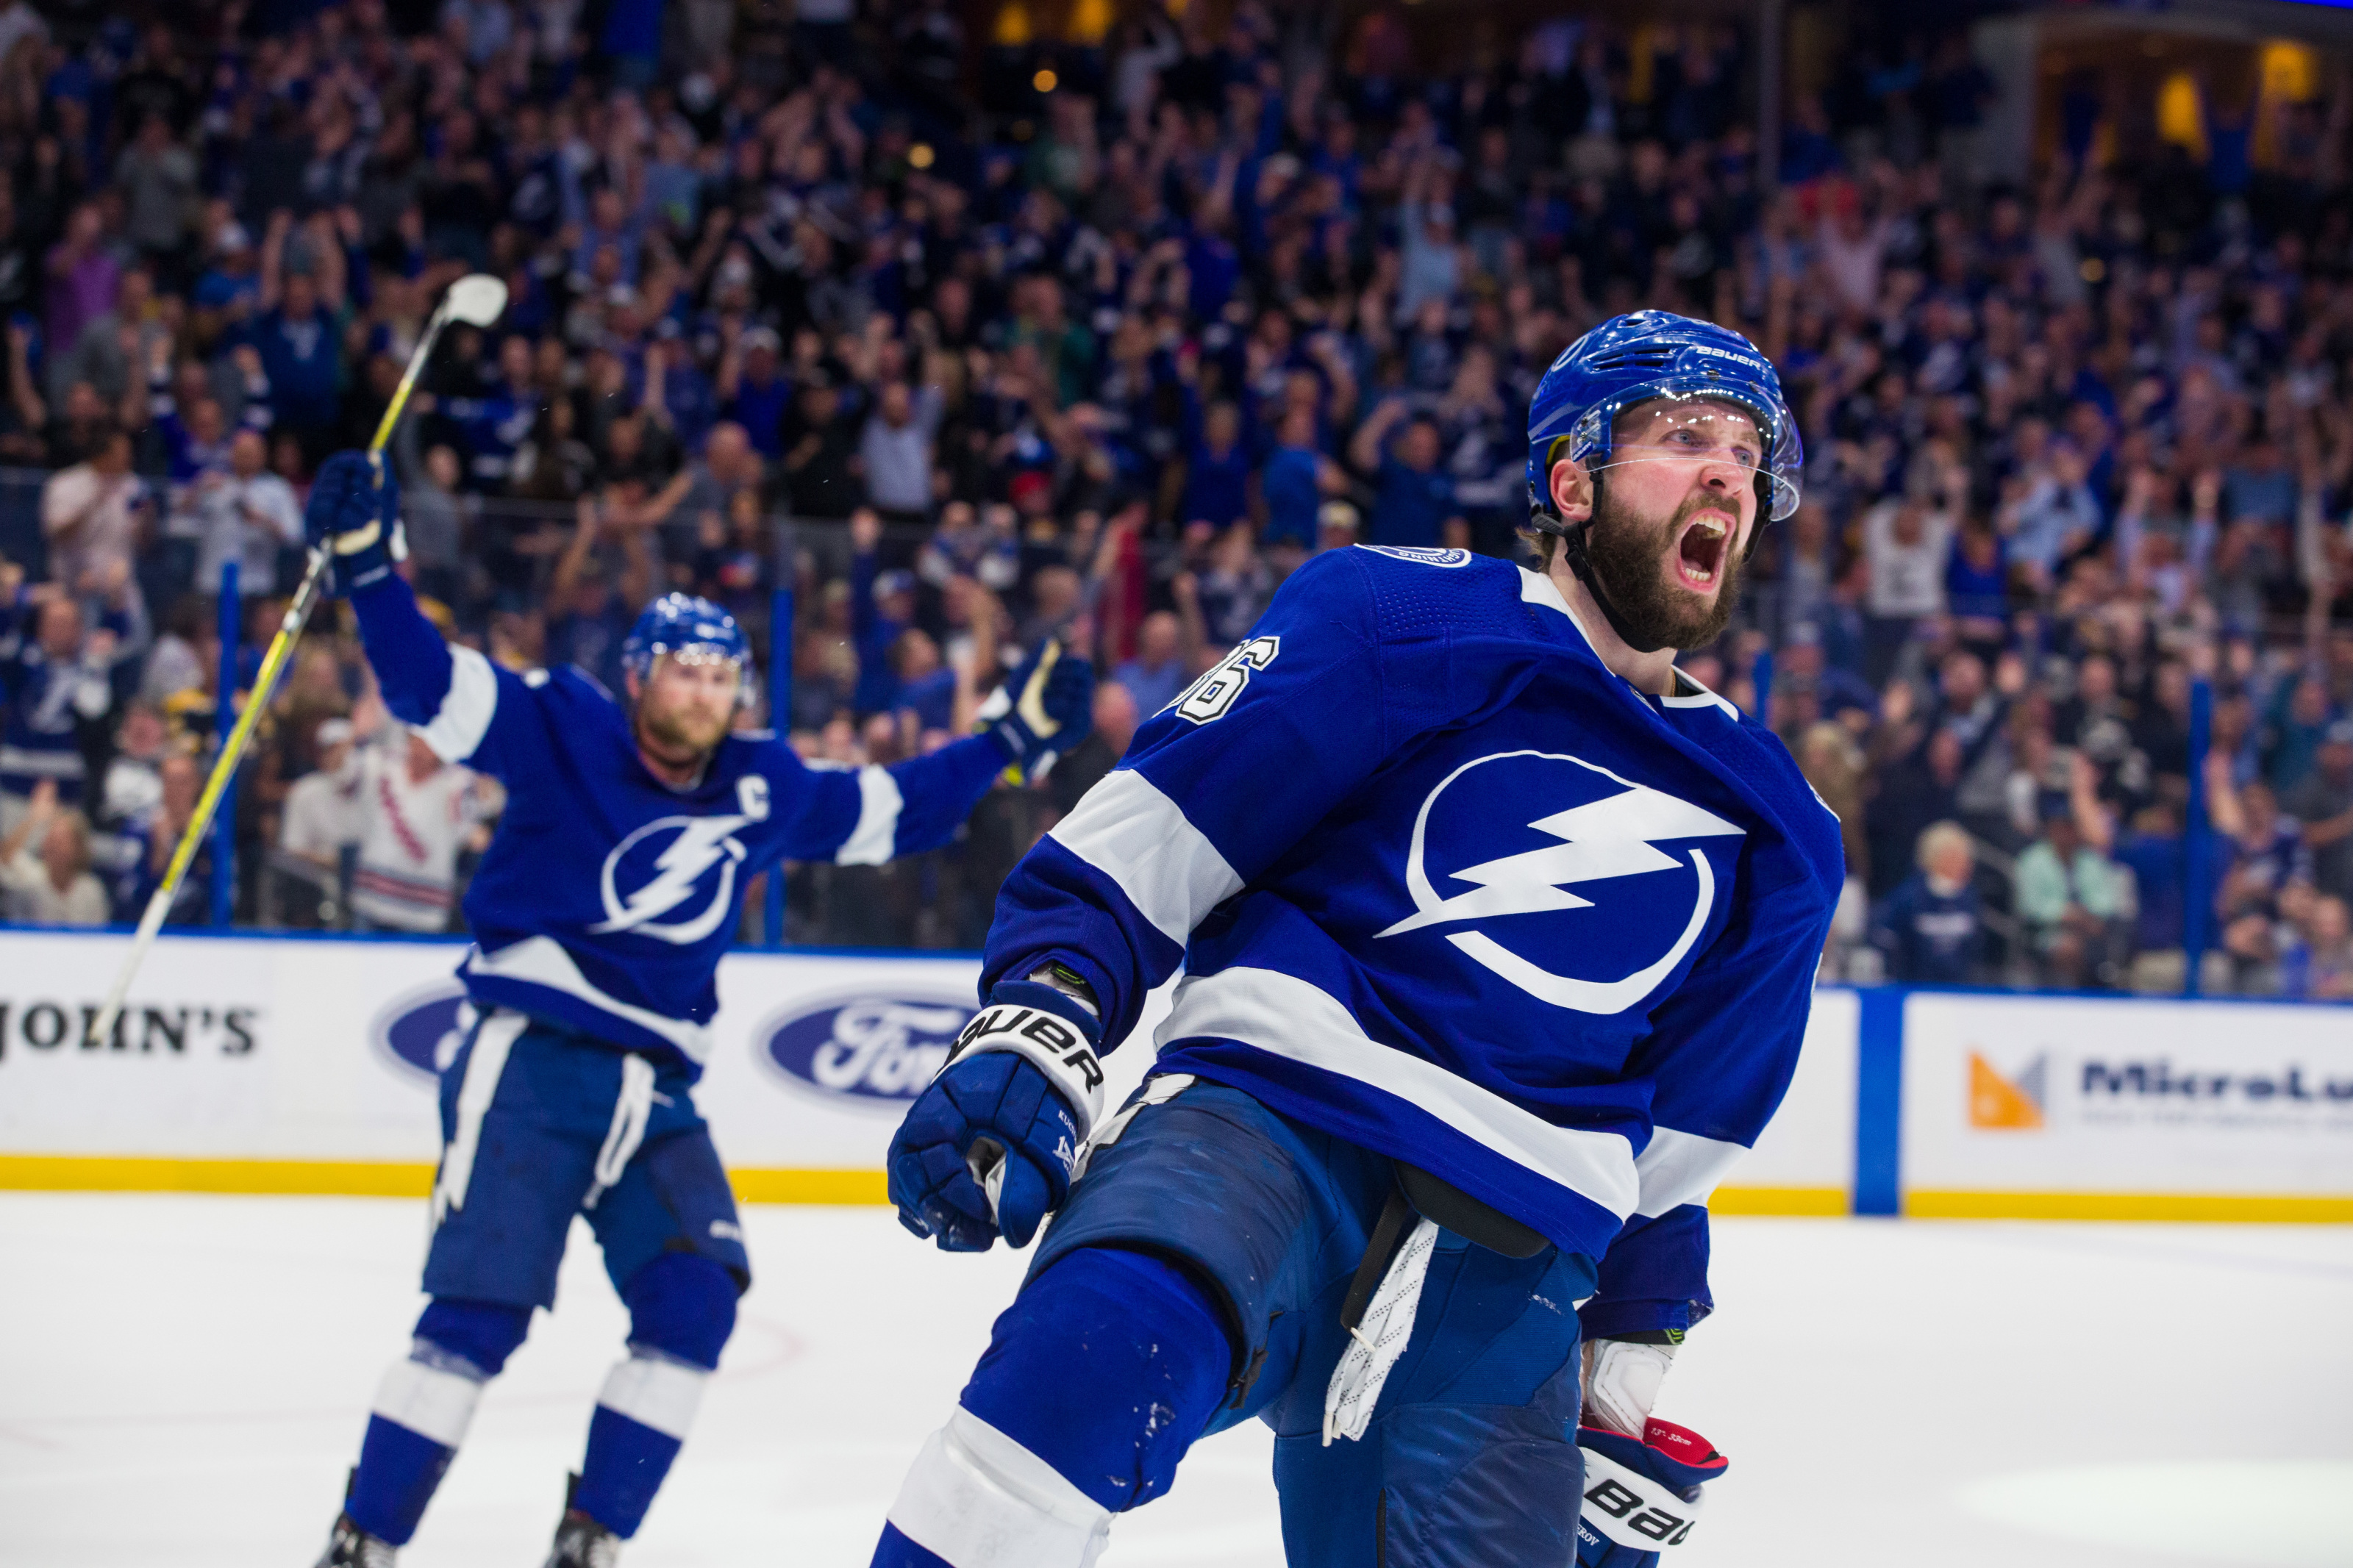 Some potentially bad news for Brayden Point following Game 1 - HockeyFeed